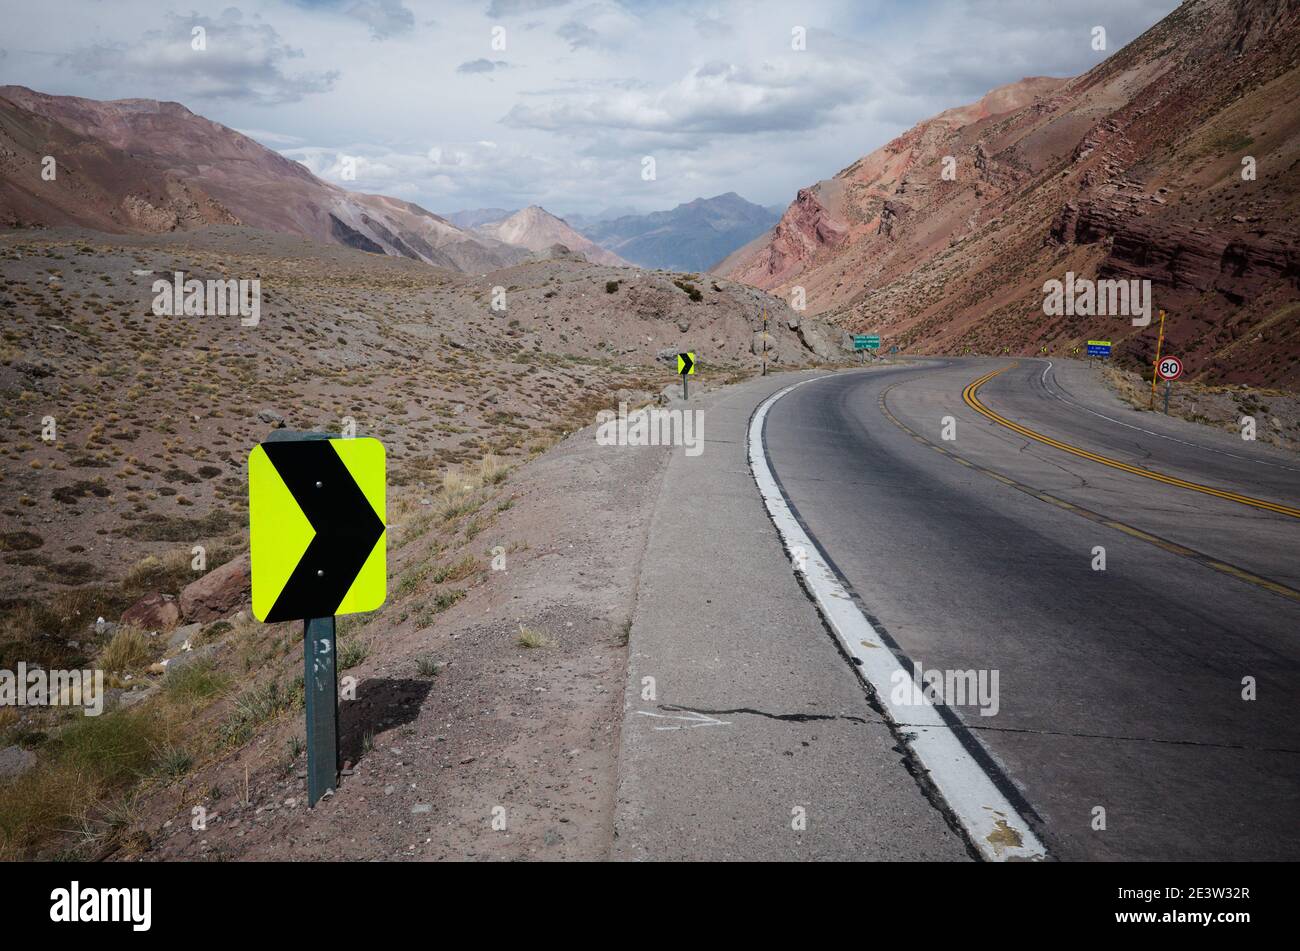 Sharp turn warning sign on mountain road. Highway road in Andes Mountains. Mendoza province, Argentina Stock Photo